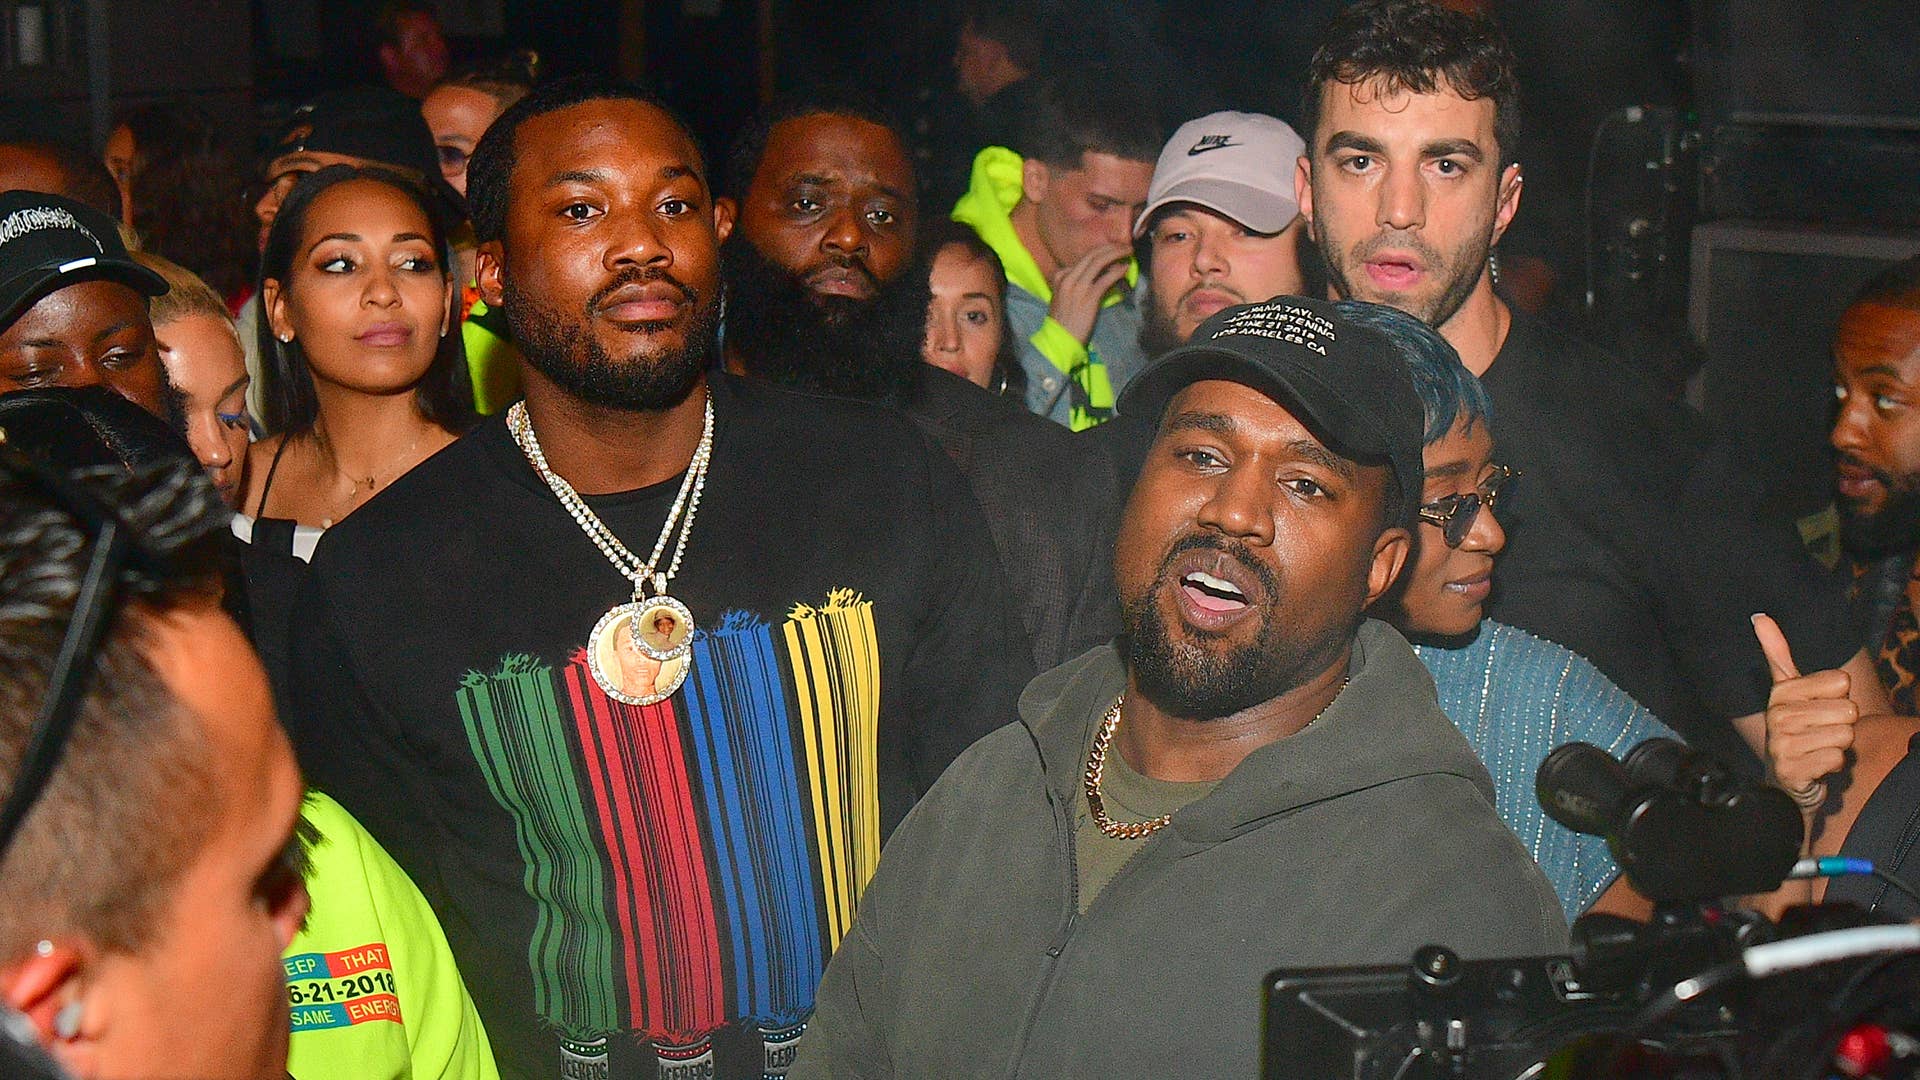 Meek Mill and Kanye West attend Teyana Taylor album Release Party at Universal Studios Hollywood